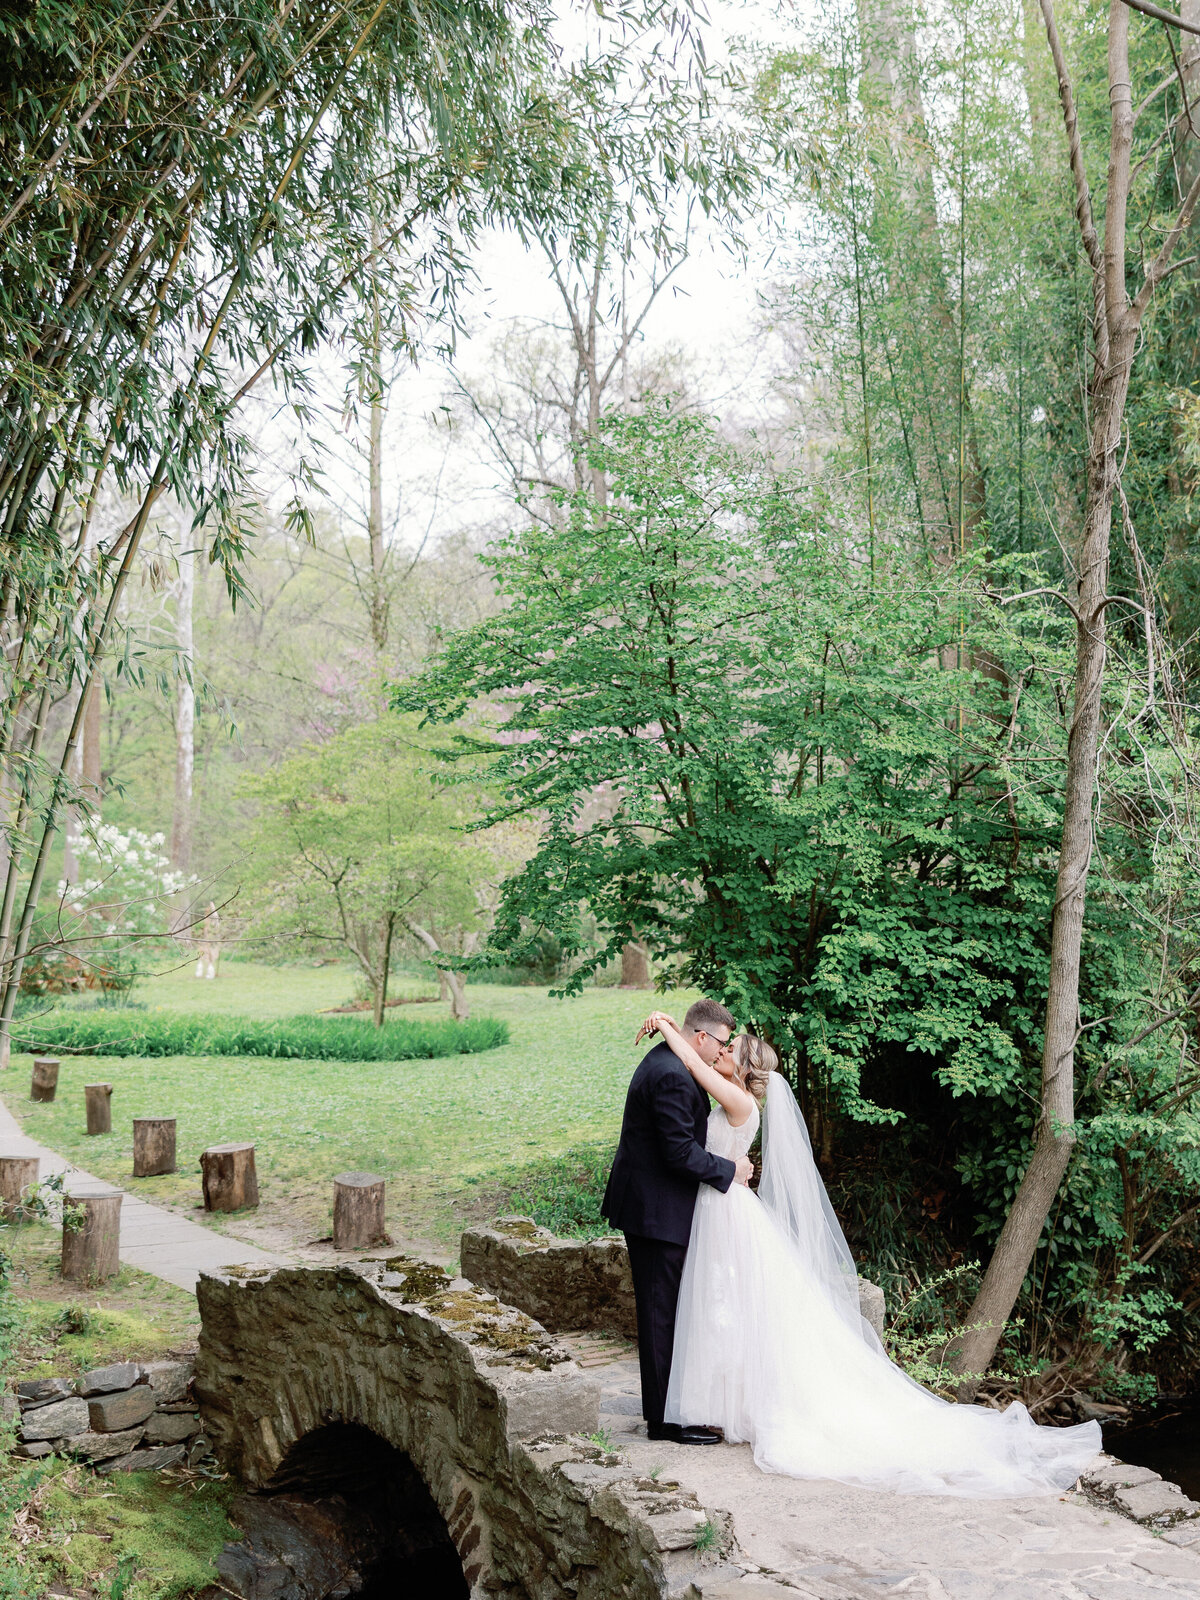 A bride and groom embrace and kiss on a stone bride with a small stream running underneath and tall tress in the background